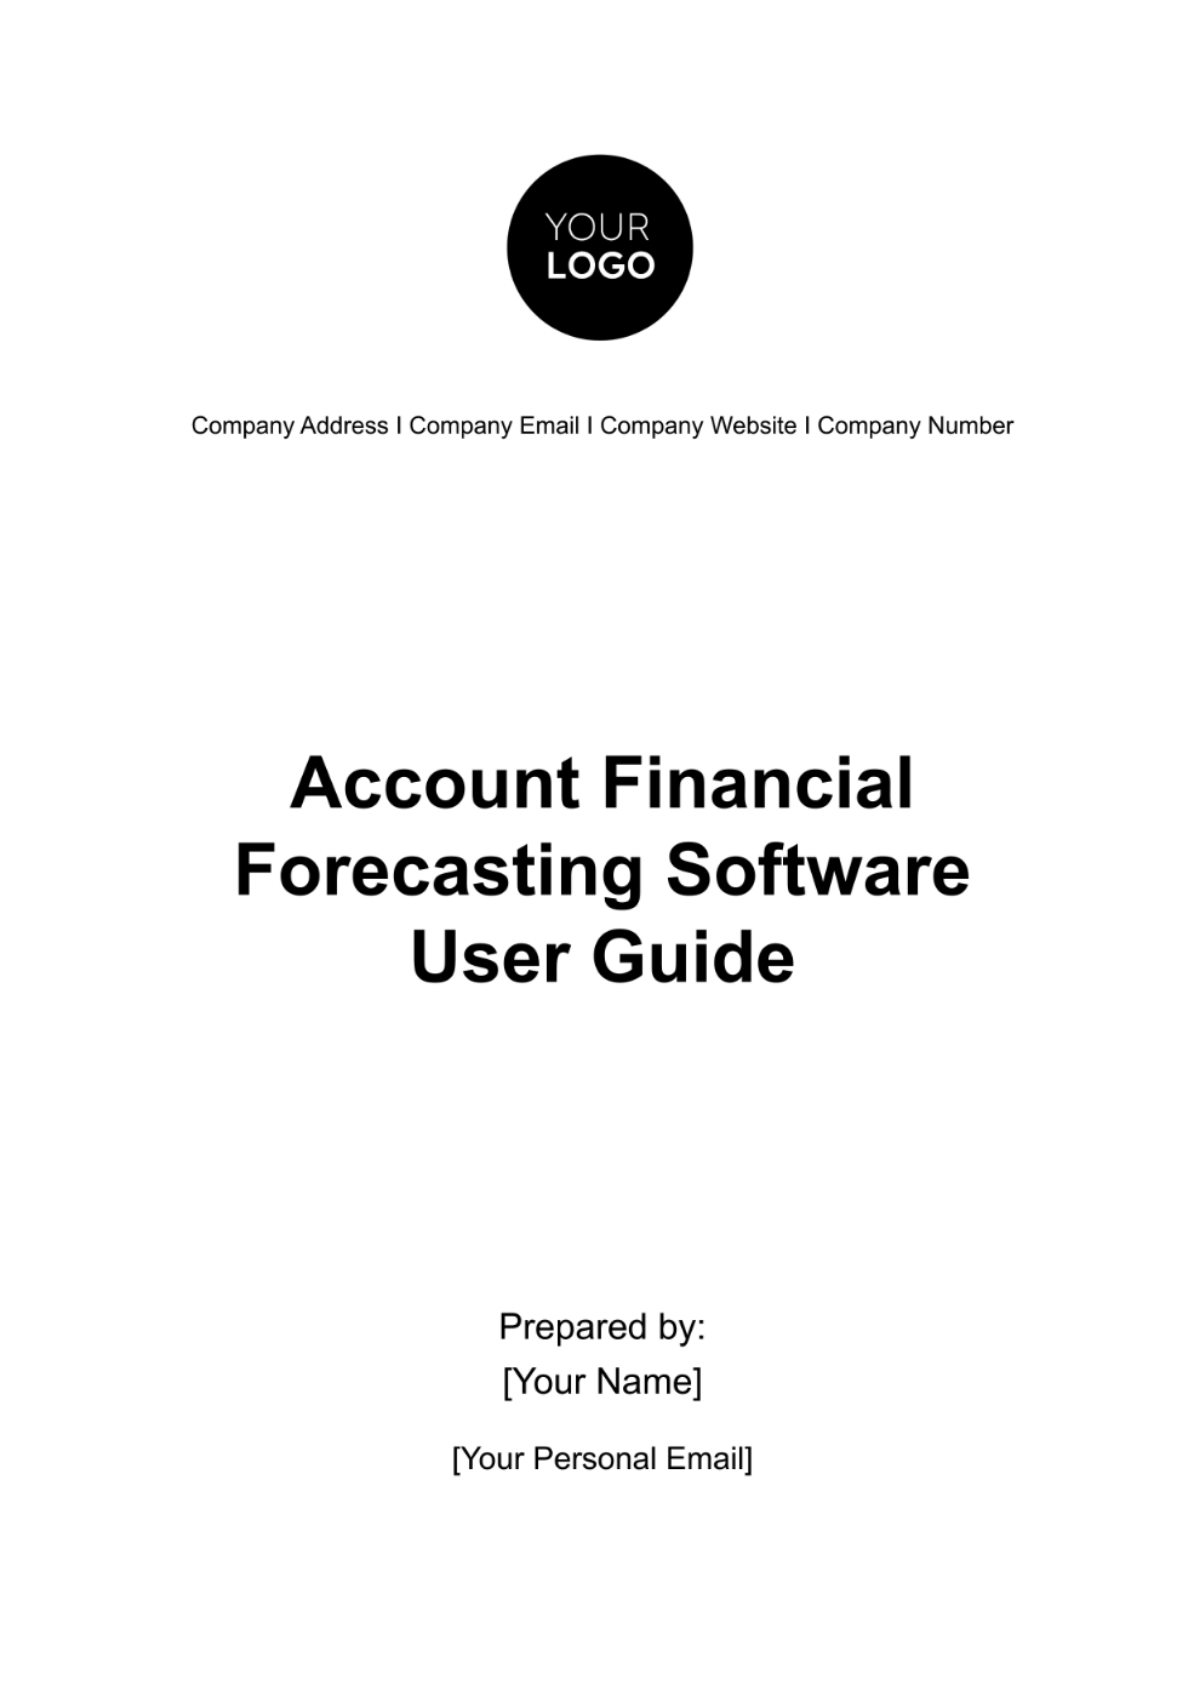 Account Financial Forecasting Software User Guide Template